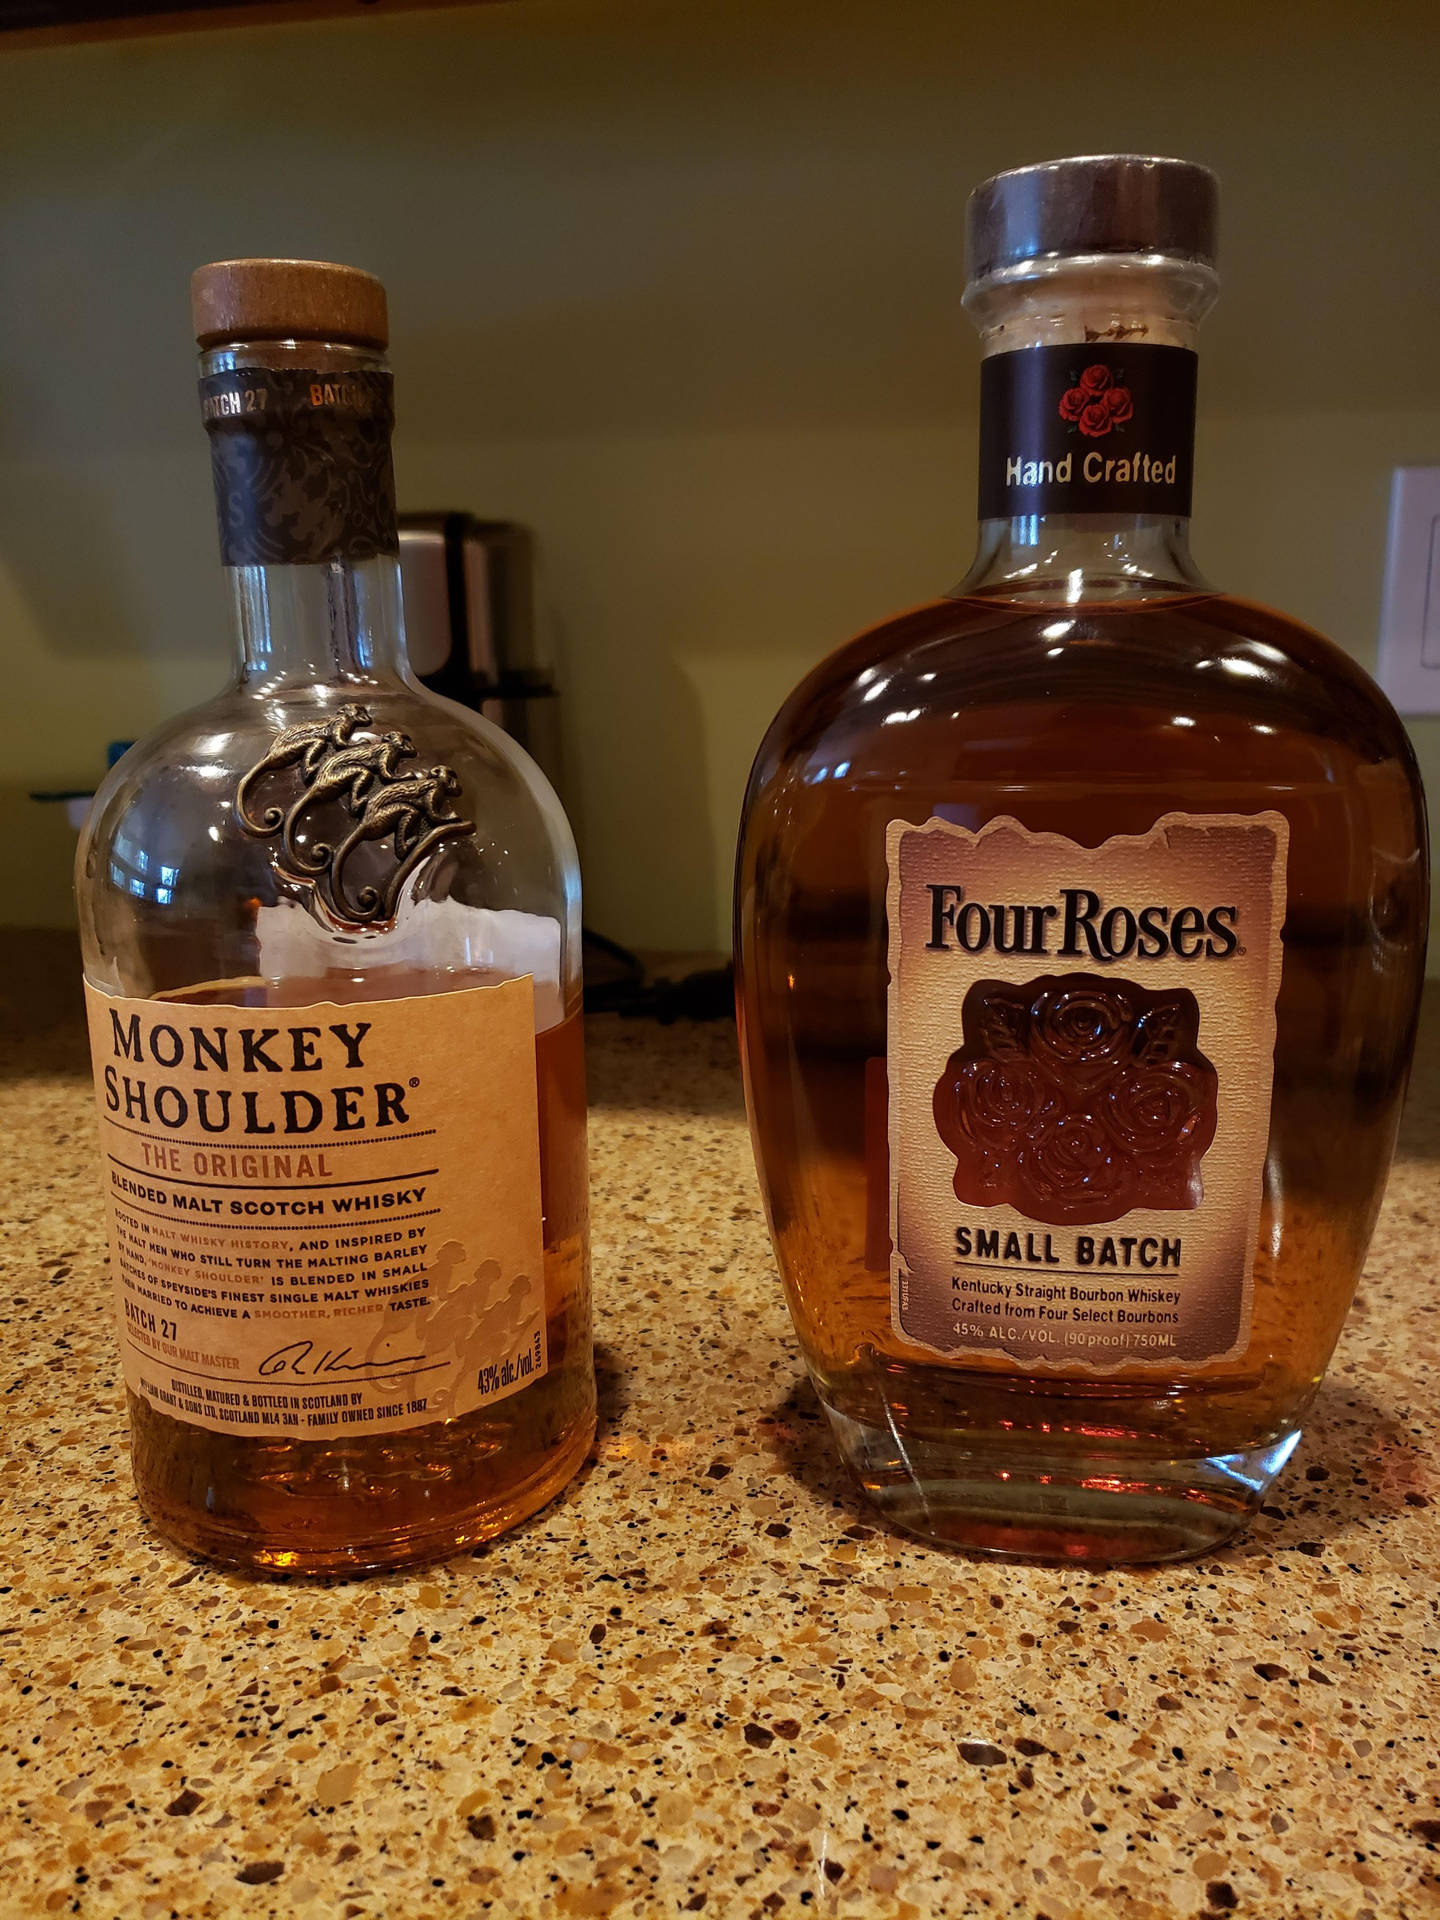 Monkey Shoulder The Original With Four Roses Small Batch Wallpaper